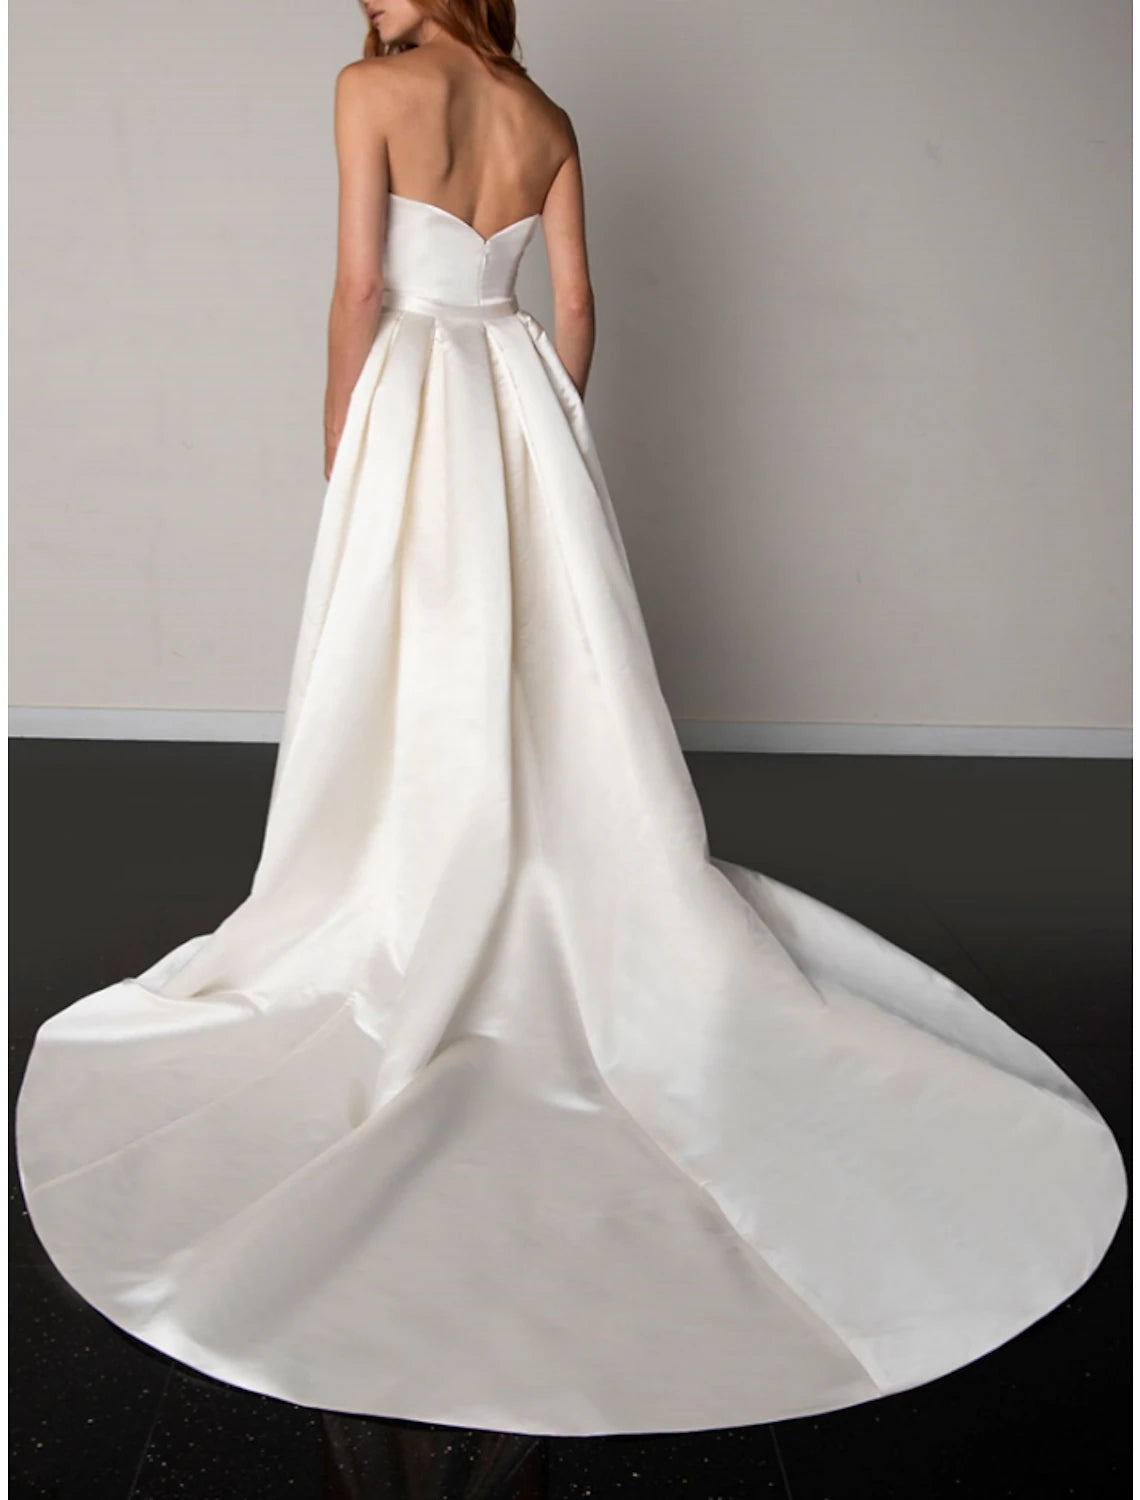 Formal Wedding Dresses A-Line Sweetheart Sleeveless Court Train Satin Bridal Gowns With Bow(s) Pleats